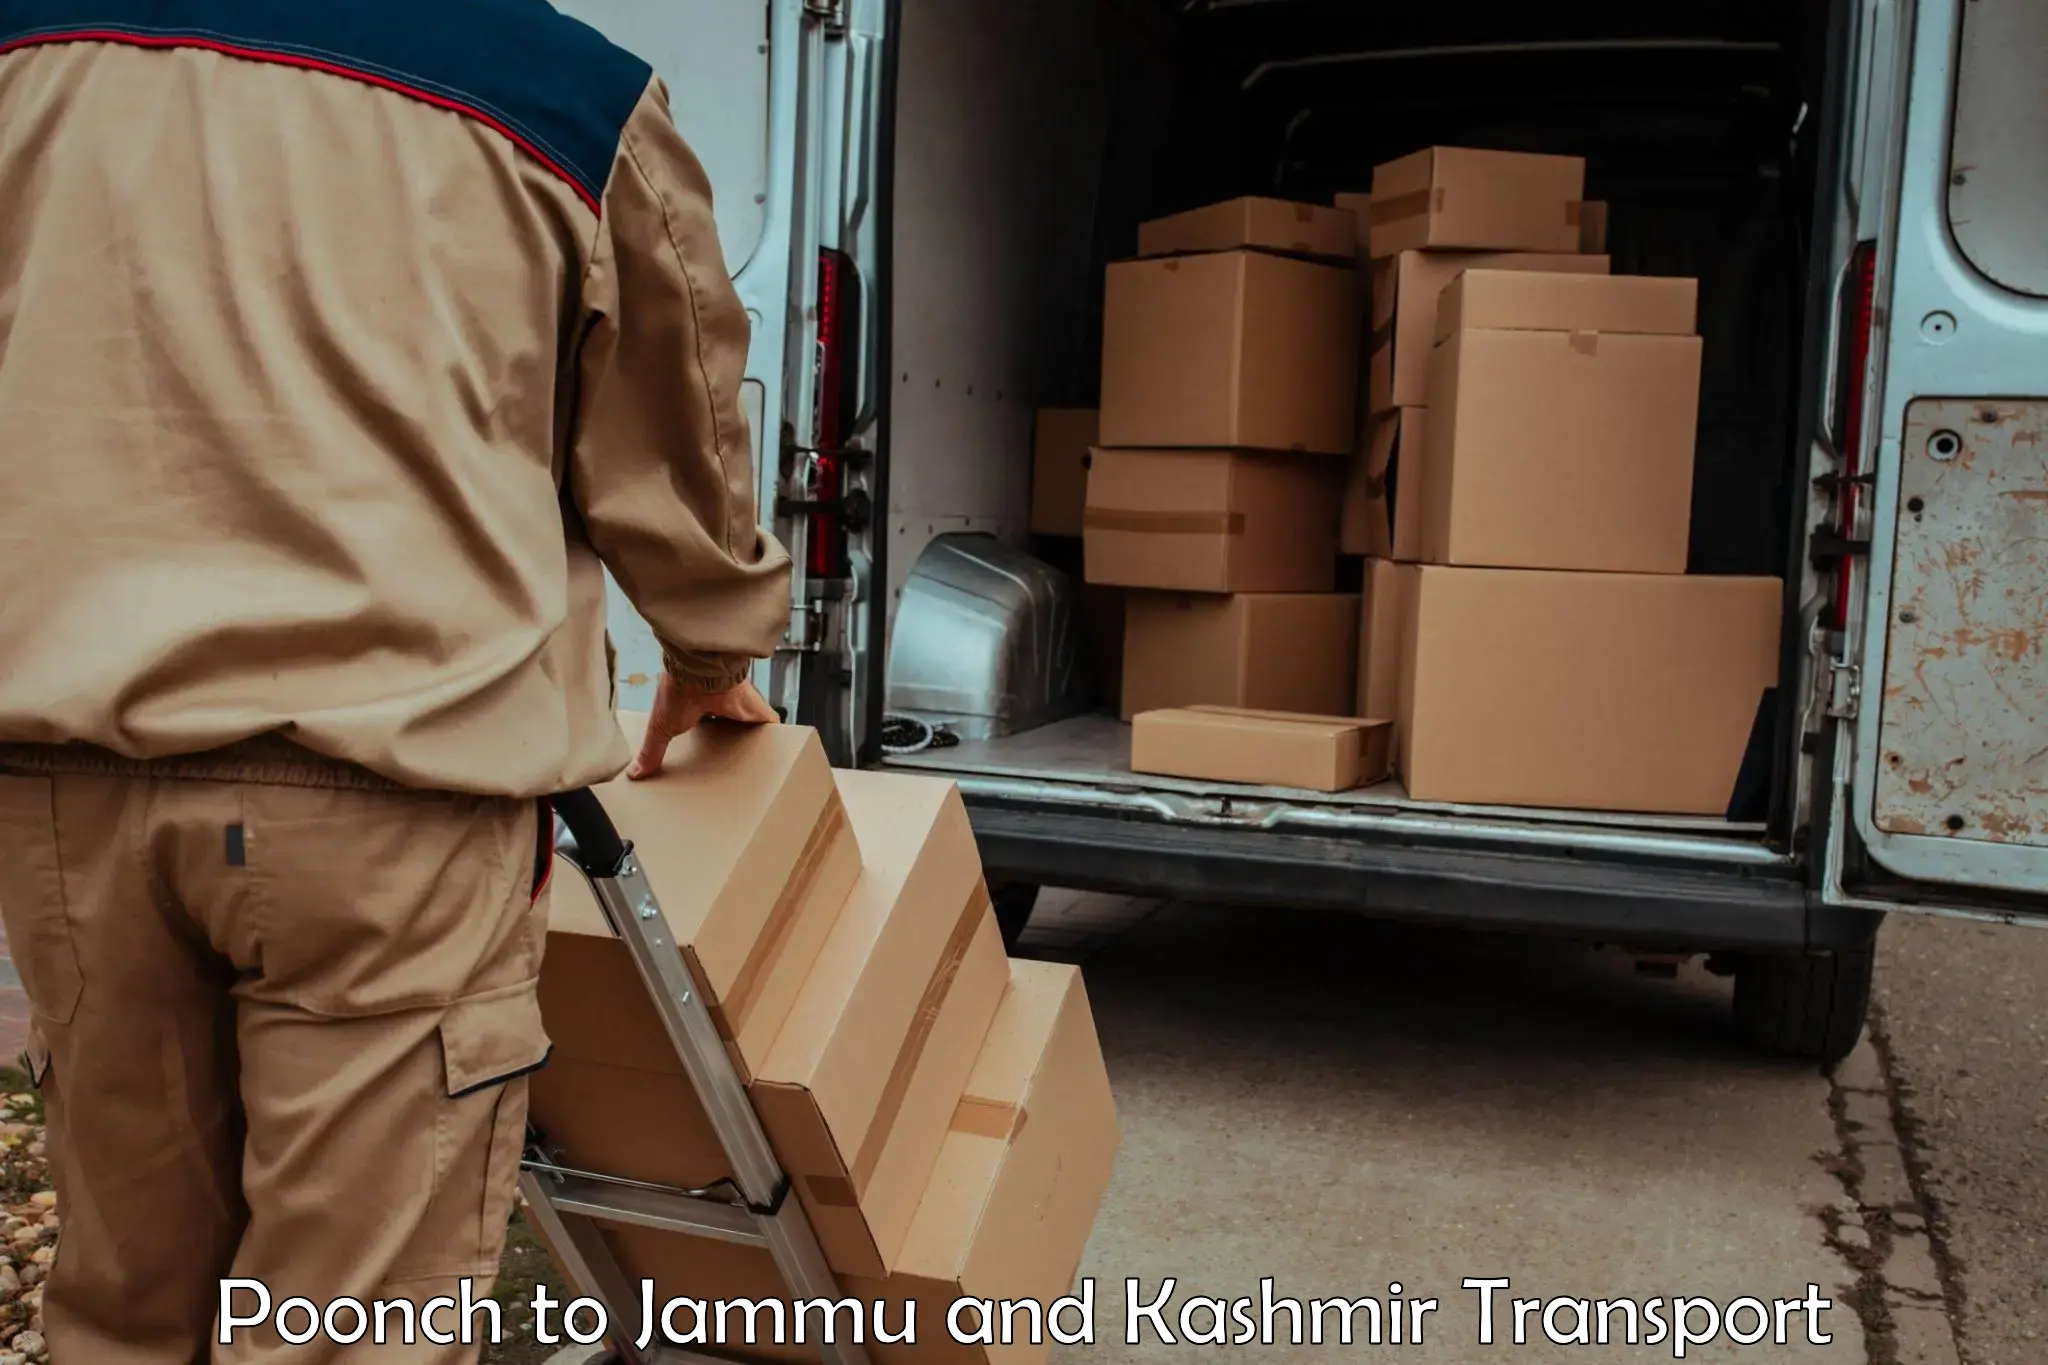 Goods delivery service Poonch to Jammu and Kashmir